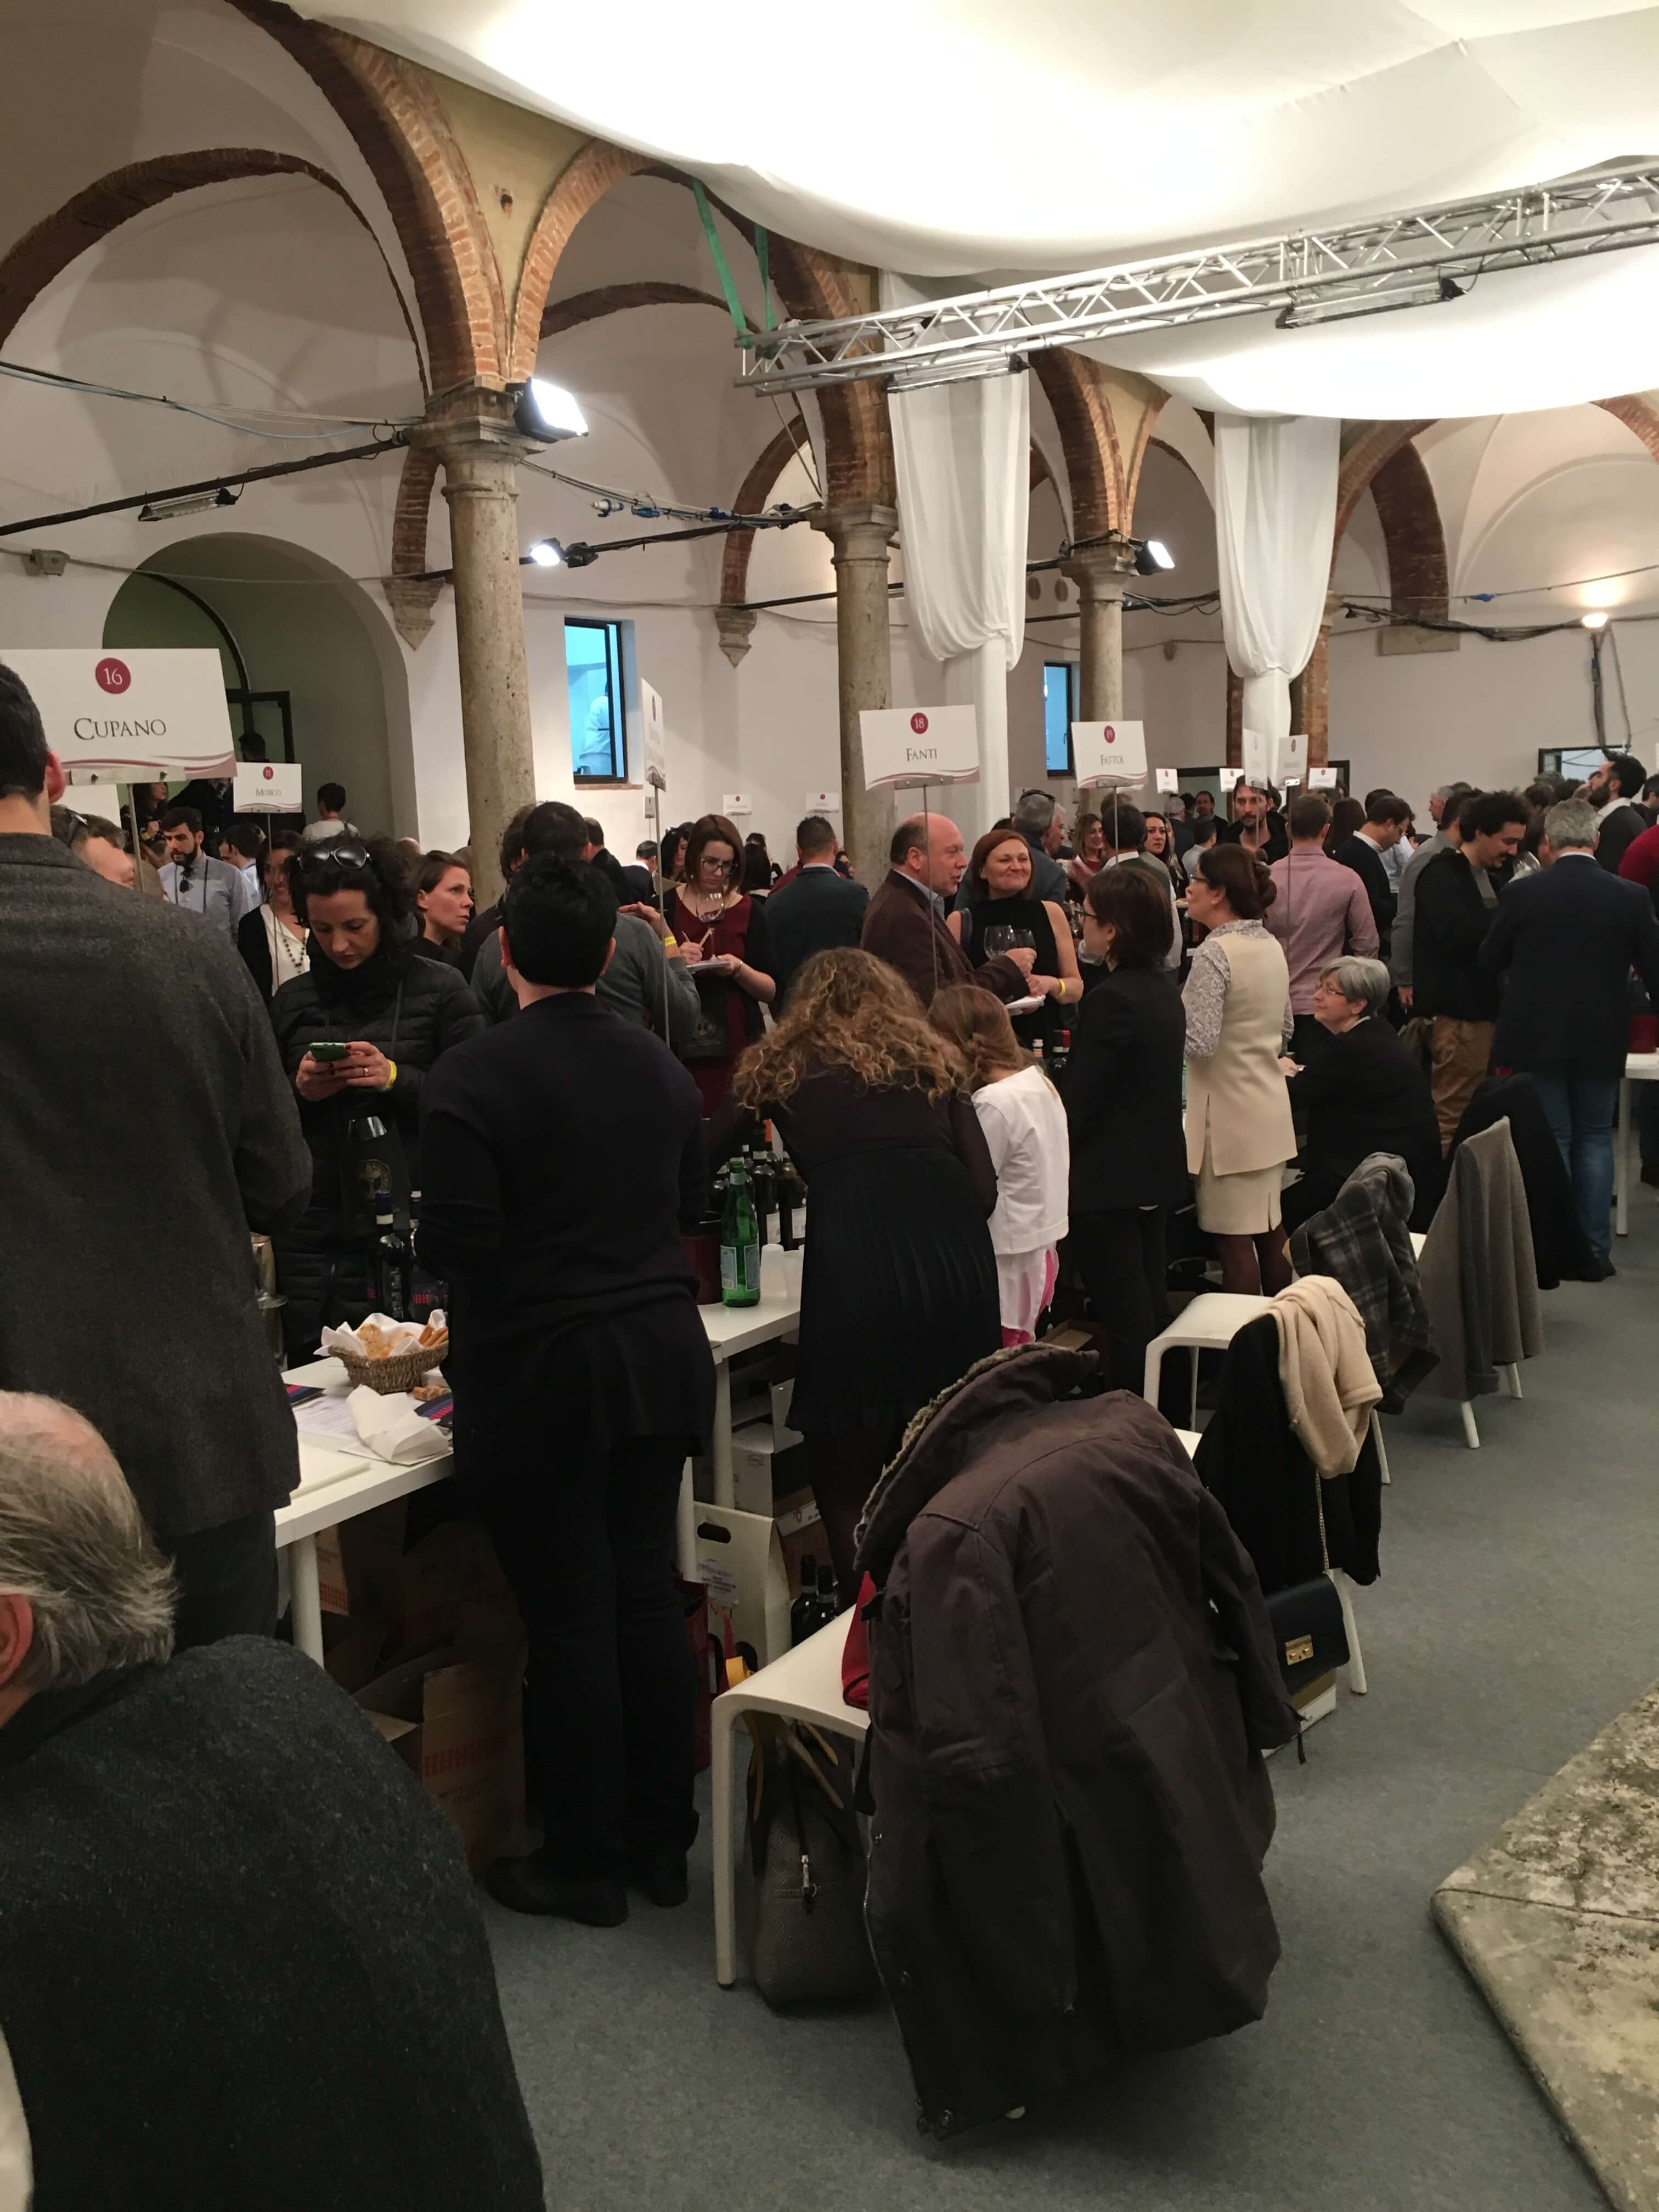 Crowded Wine Tasting Event